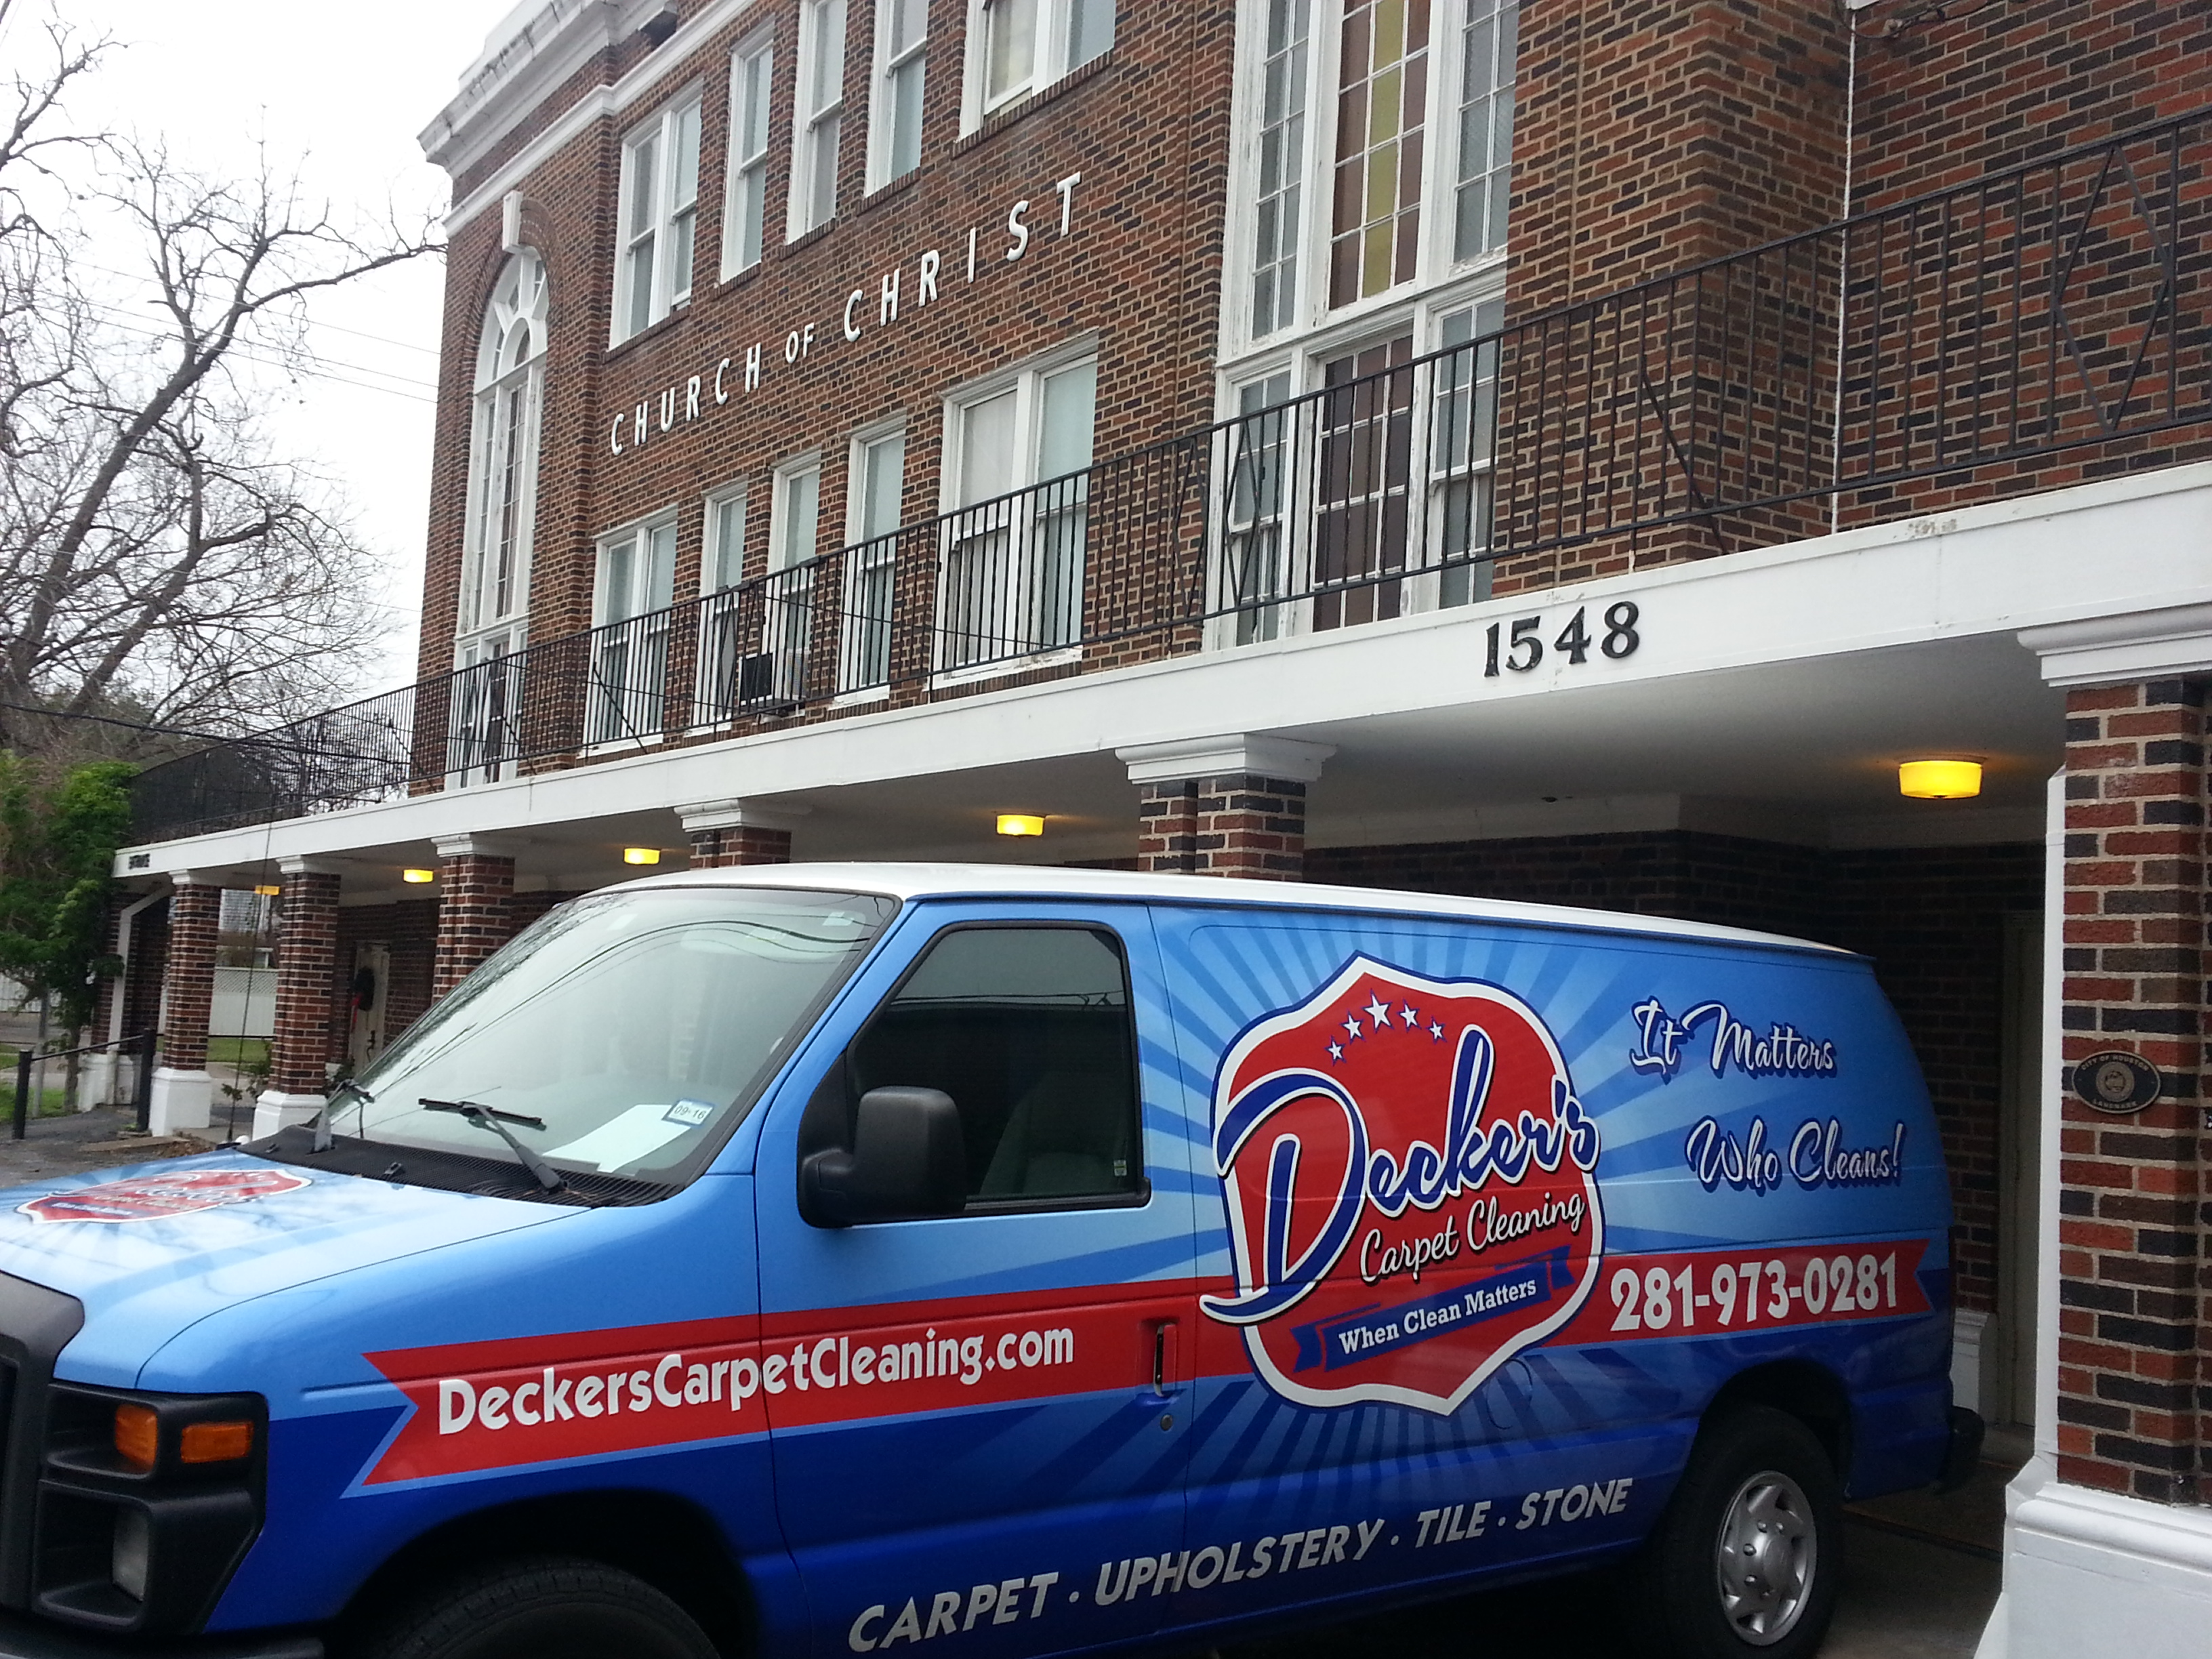 Decker's Carpet Cleaning Van Parked outside of church building